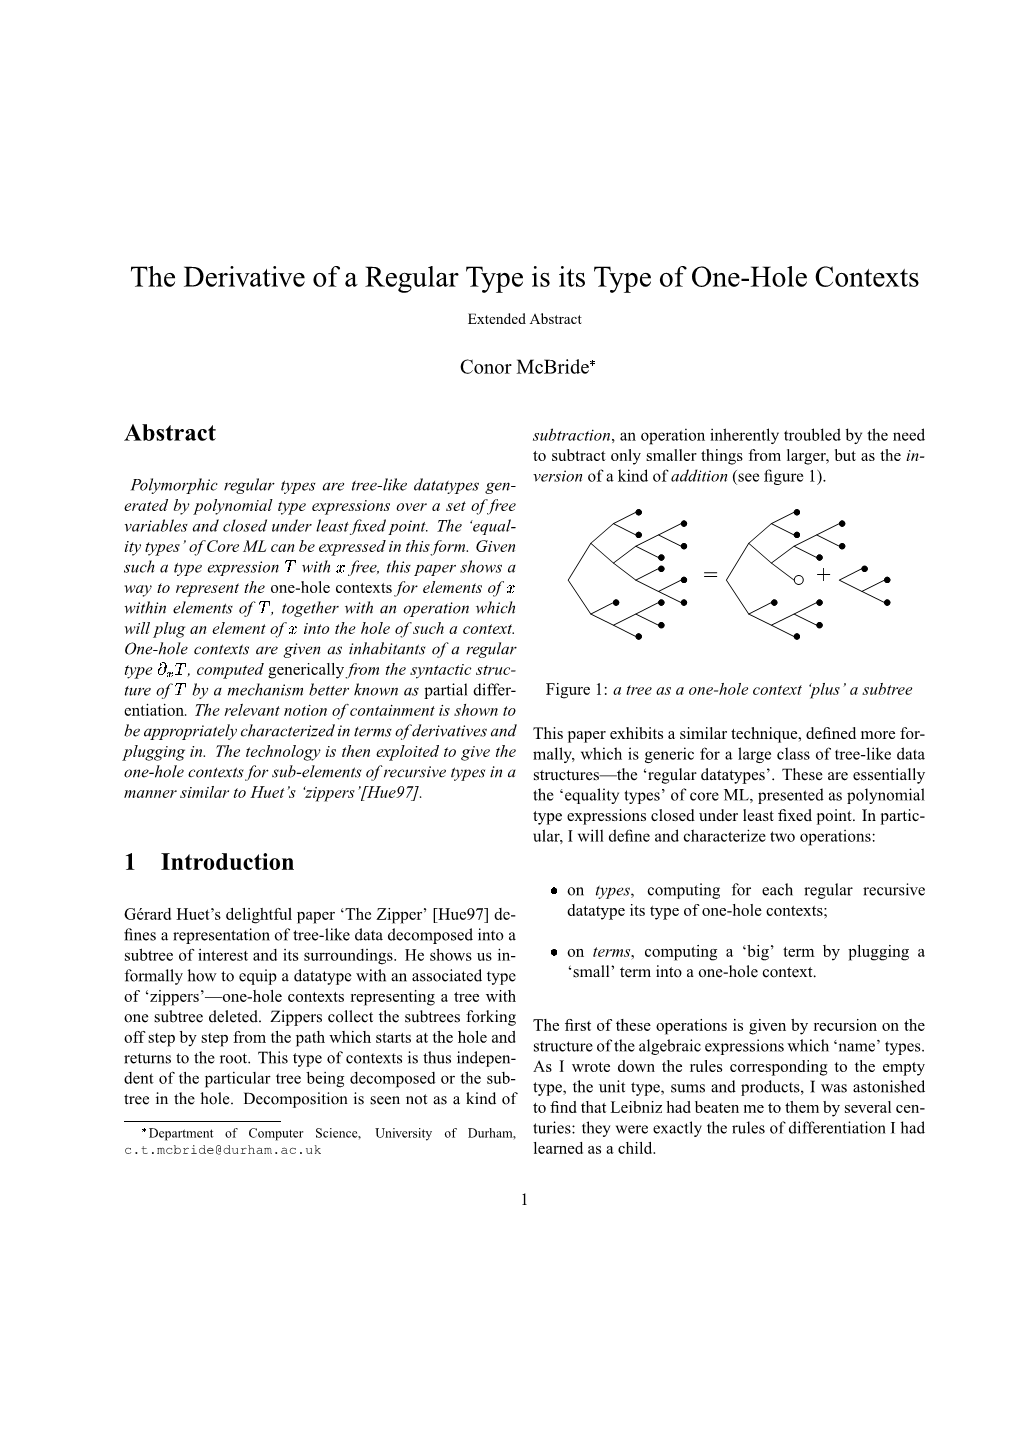 The Derivative of a Regular Type Is Its Type of One-Hole Contexts